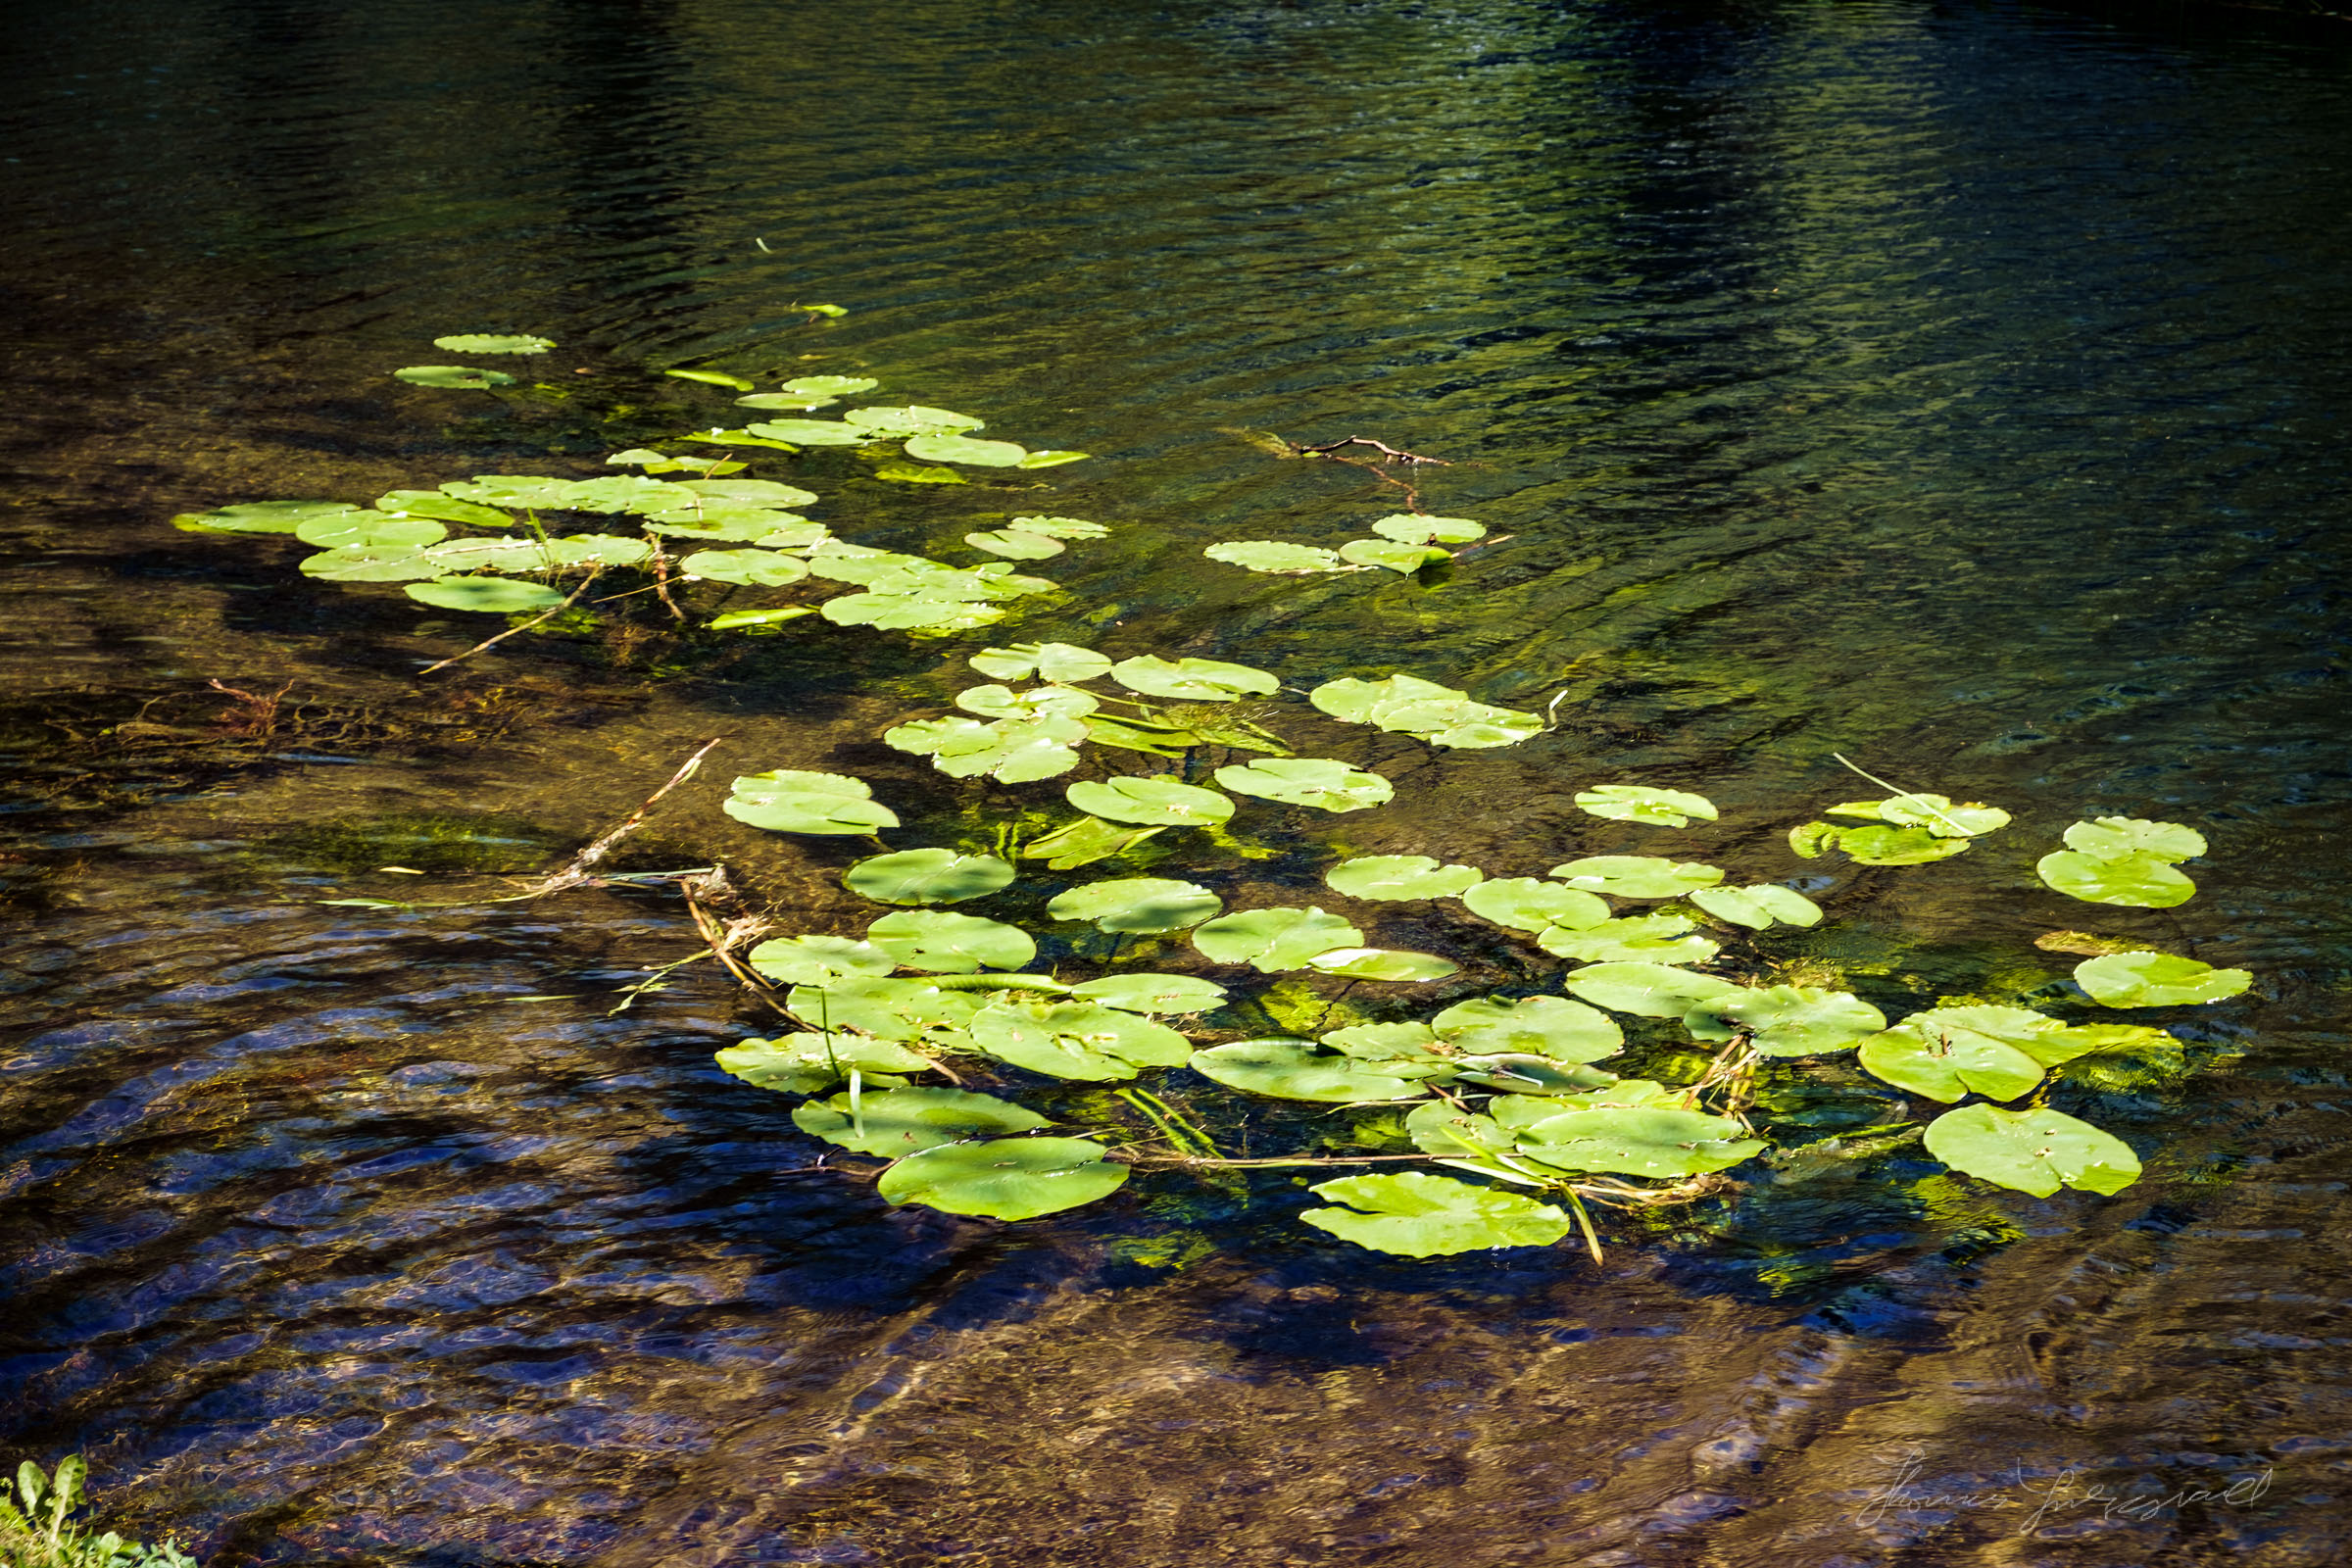 Lilly pads in the Canal